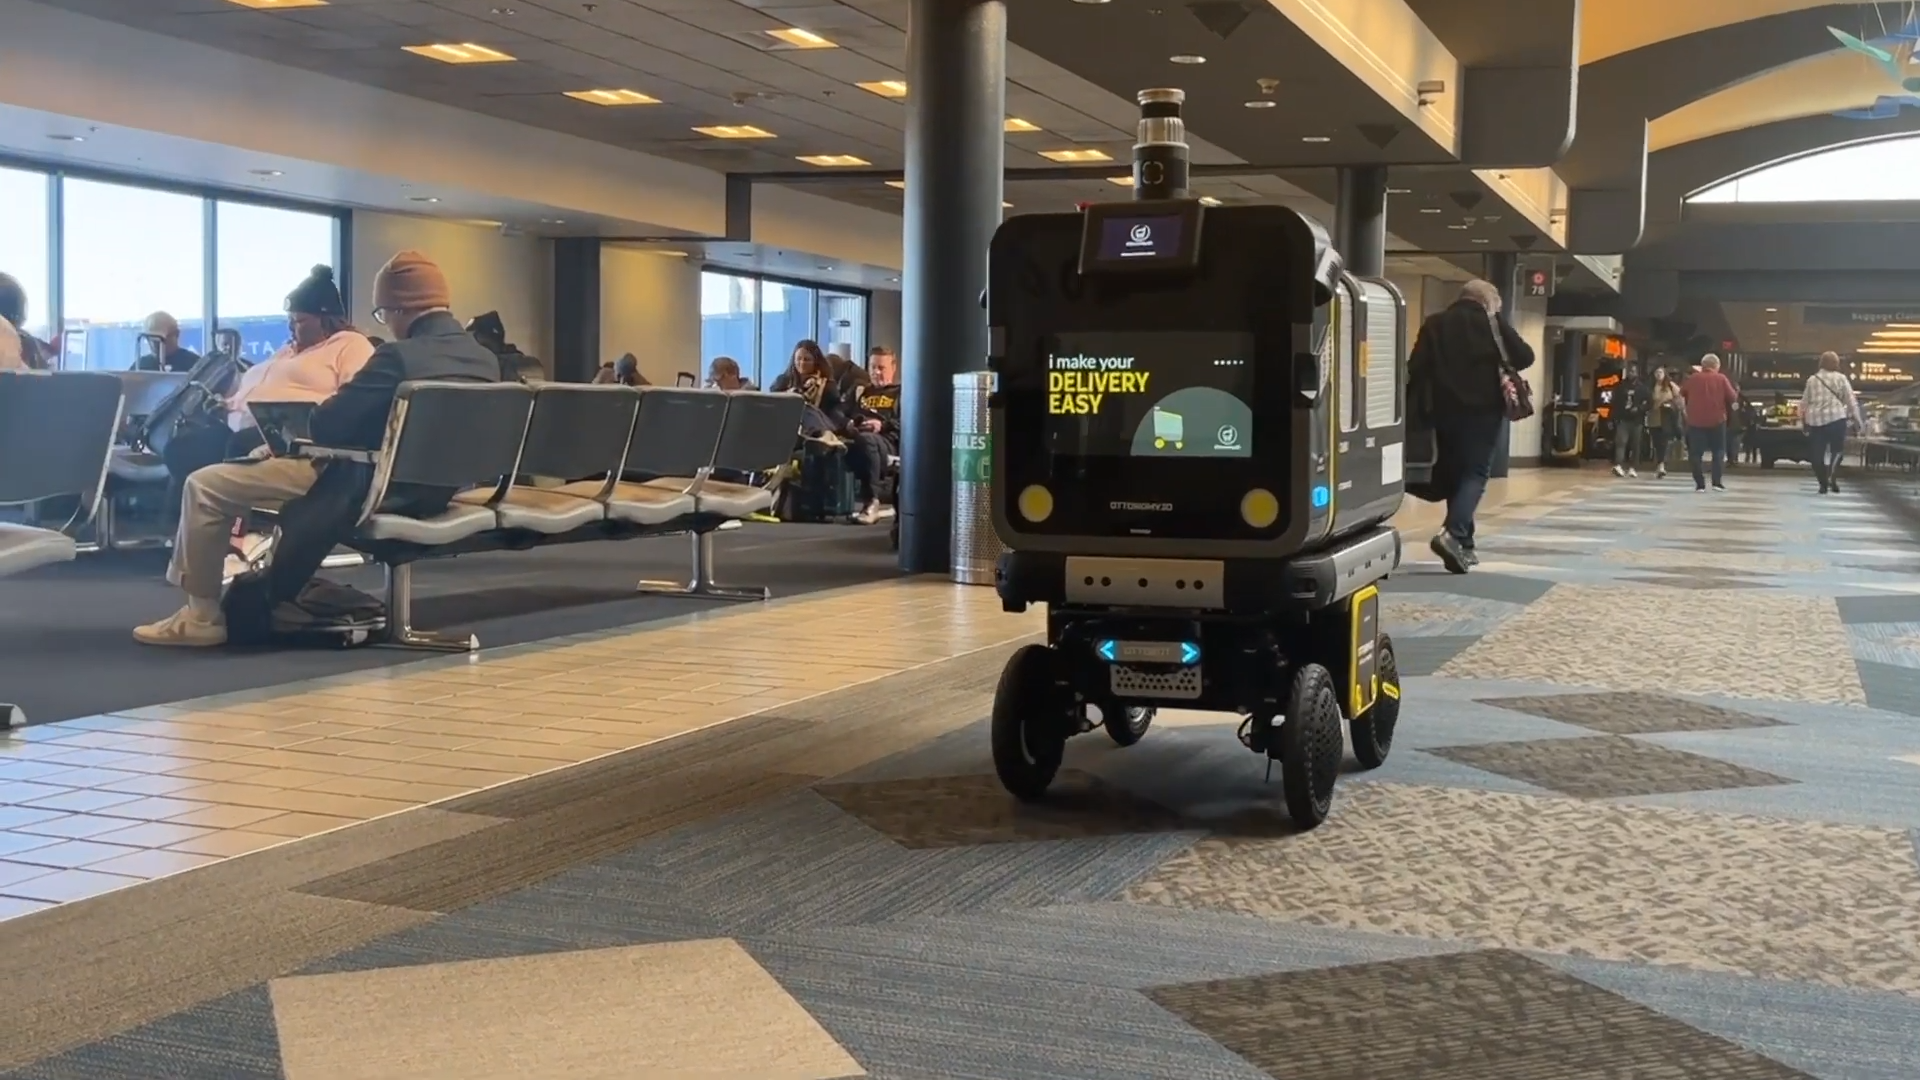 Your Next Airport Meal May Be Delivered By Robot